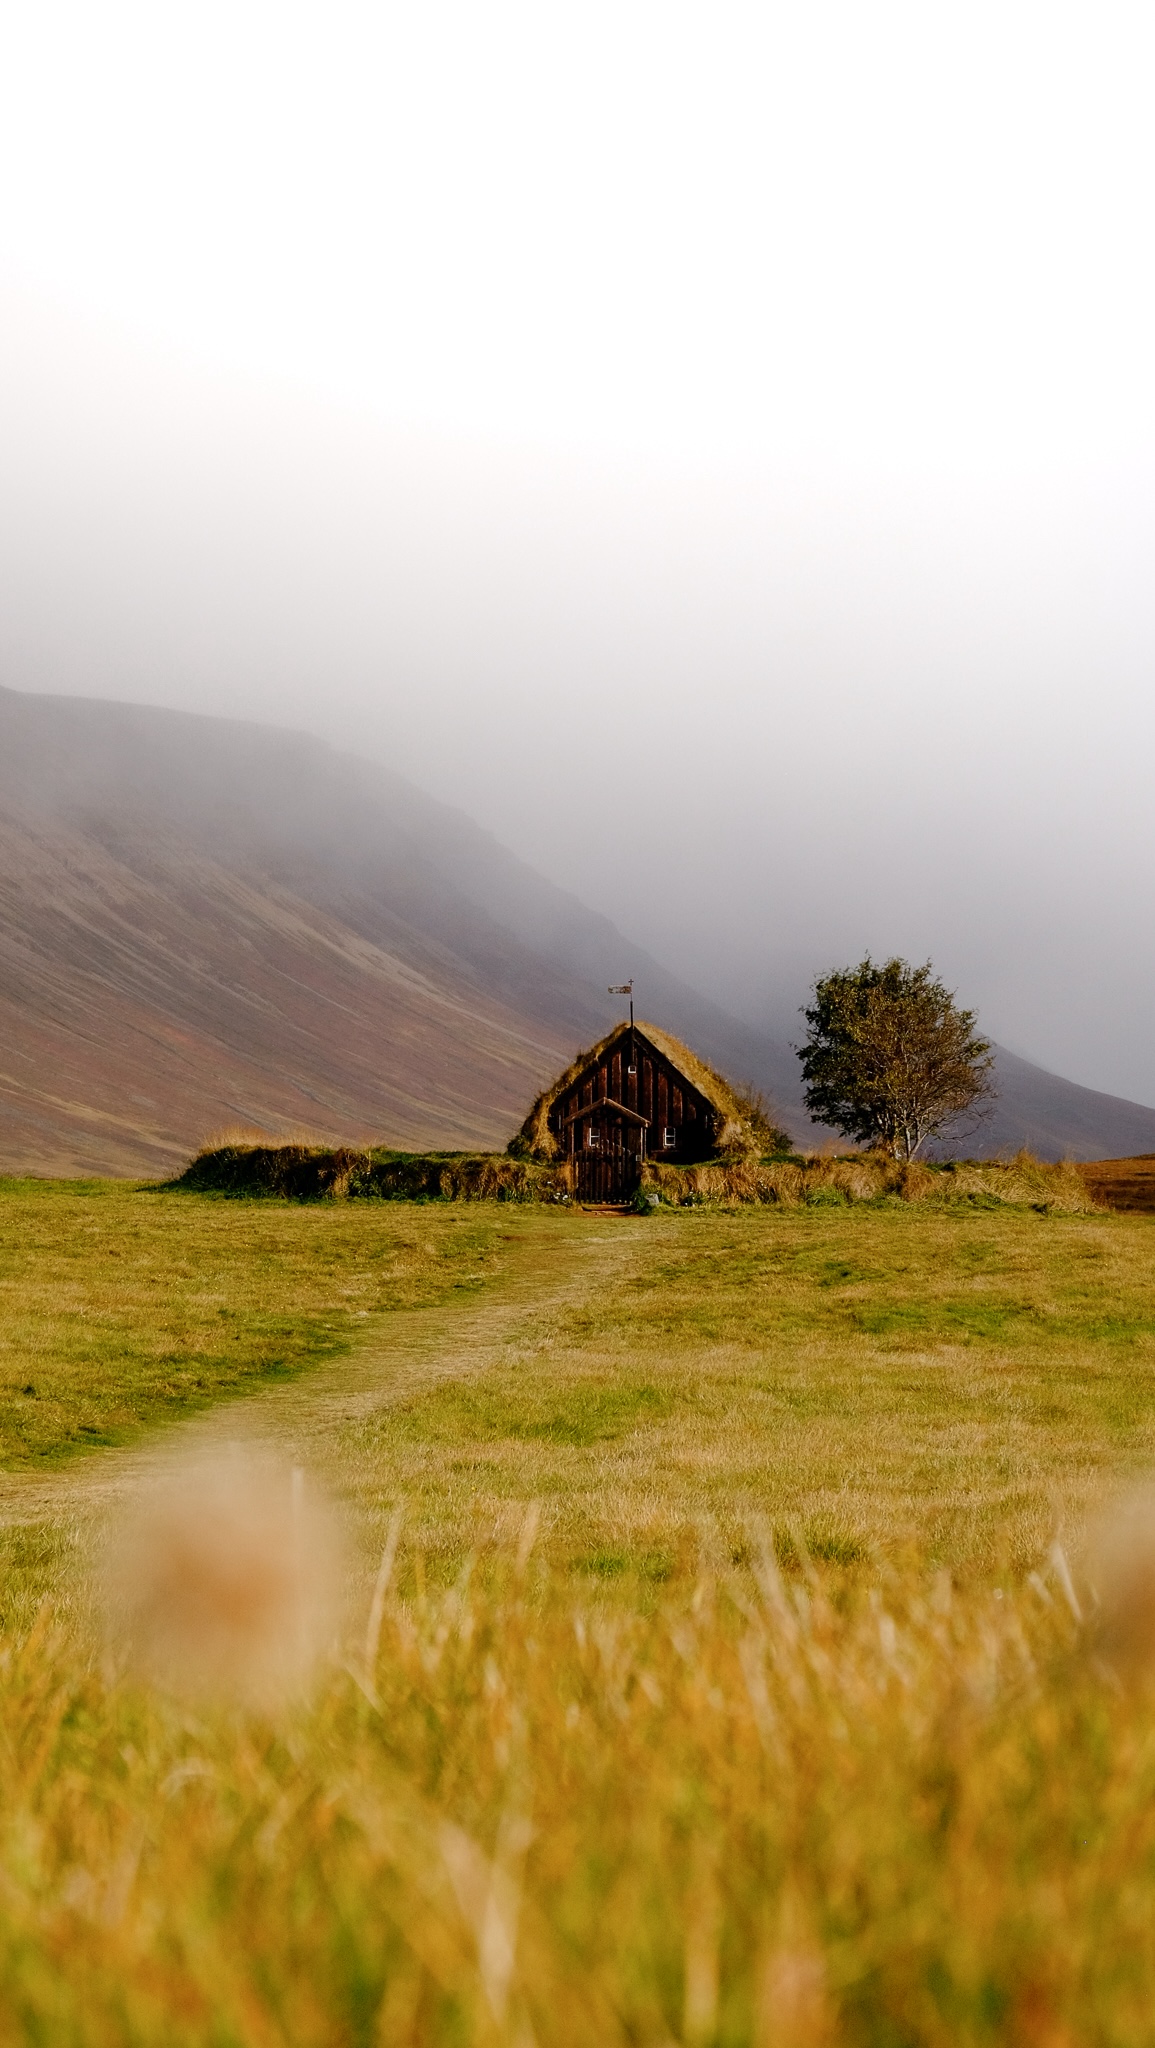 An old church with a grass roof and circular enclosure in the distance from a grass field with a mountain in the background with misty clouds rolling in